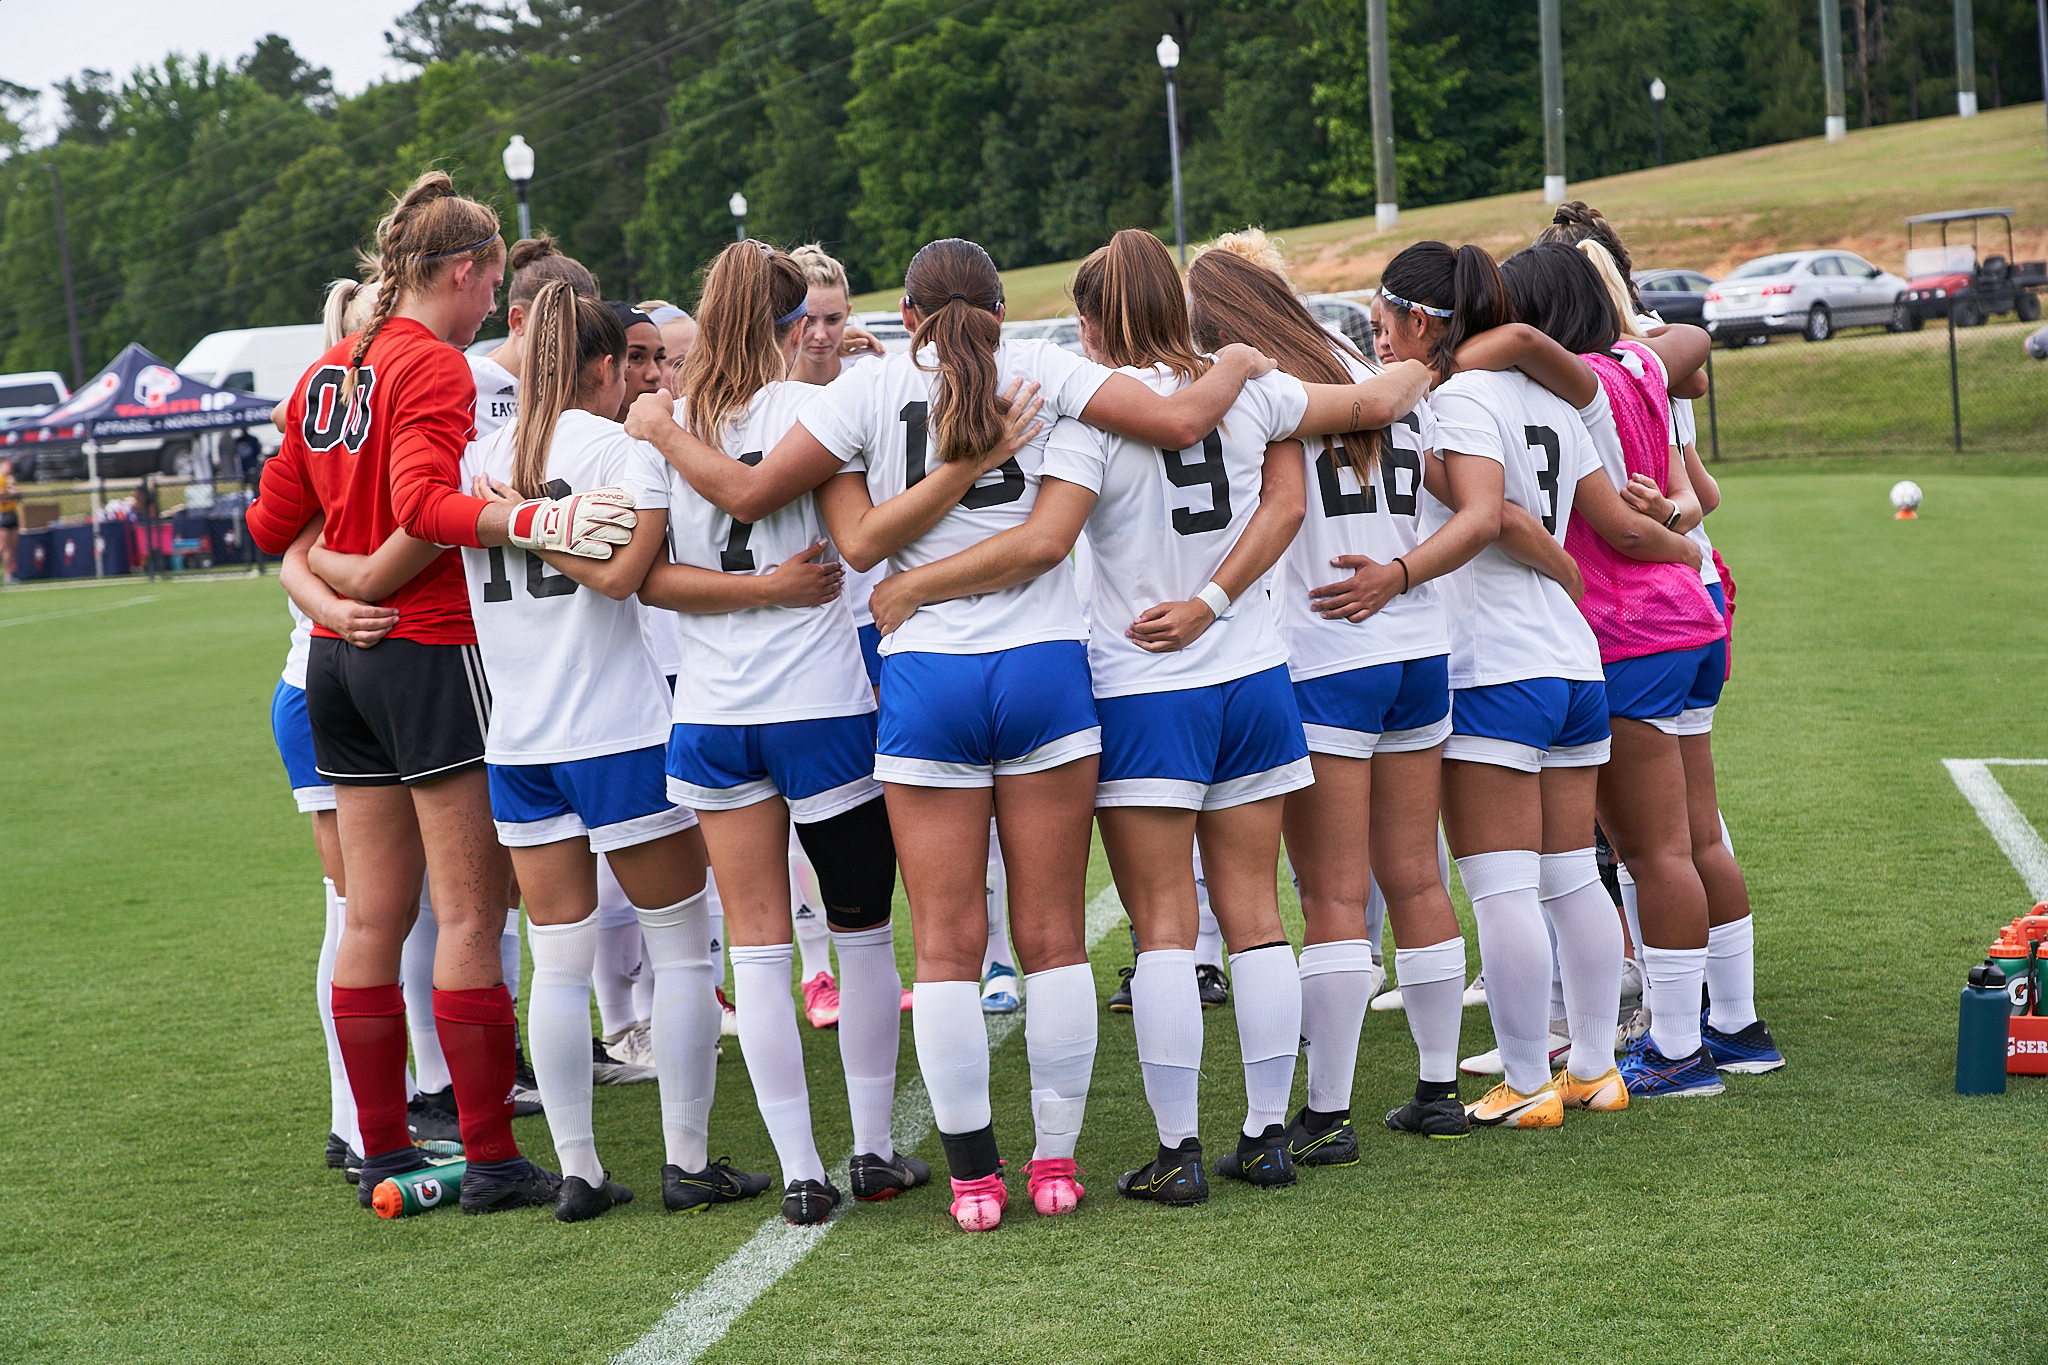 Women's soccer team faces Hill College Wednesday at national tournament